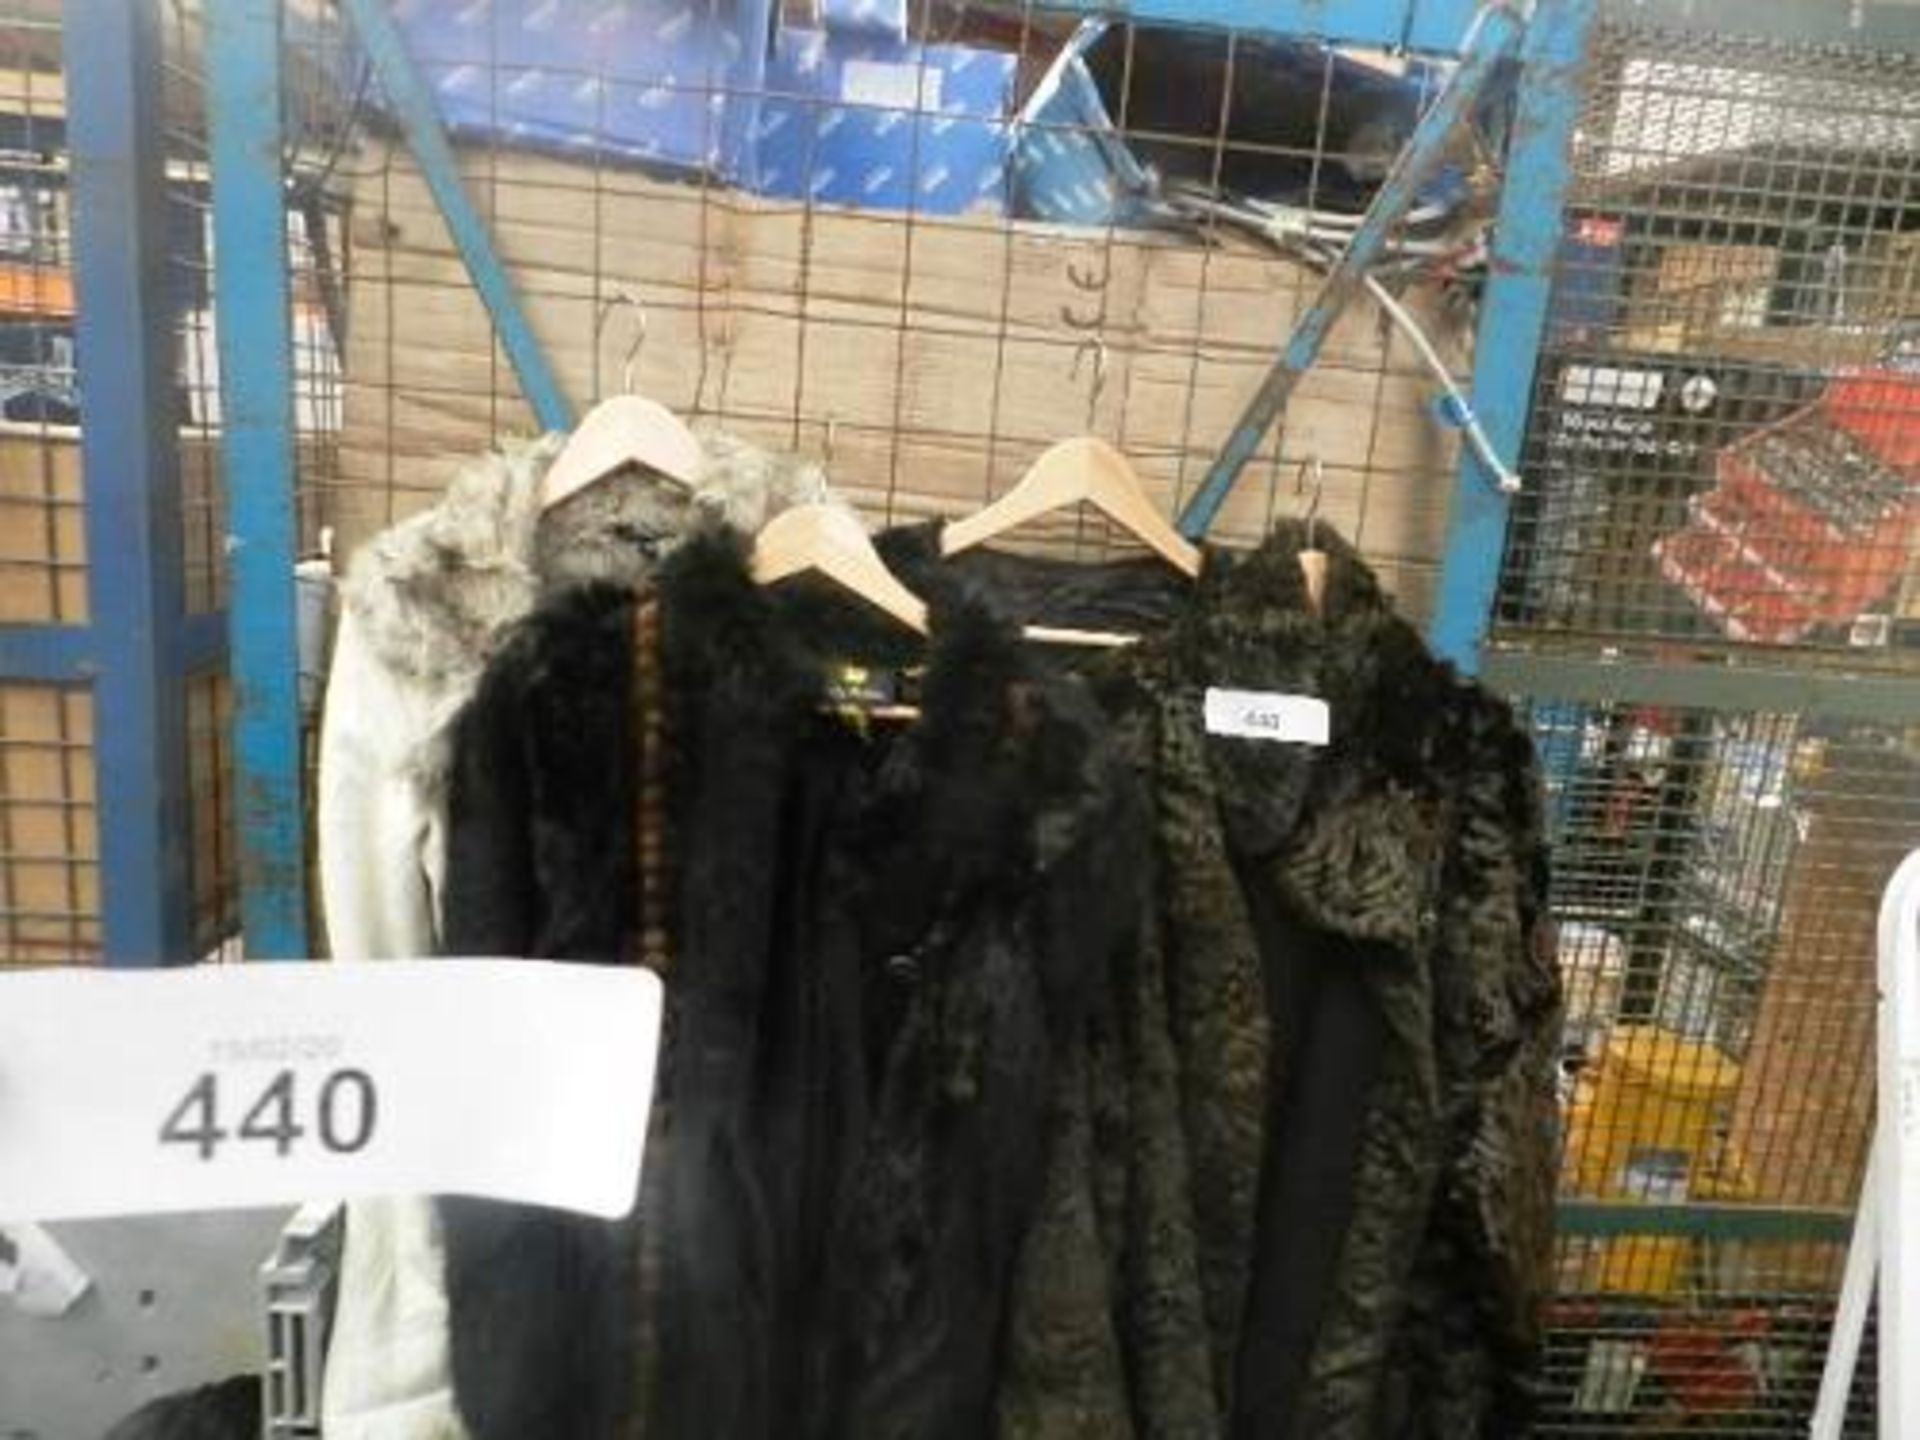 4 x fur jackets, size unknown approximately 12 - 14, includes Angora jacket by Fully Fashion,